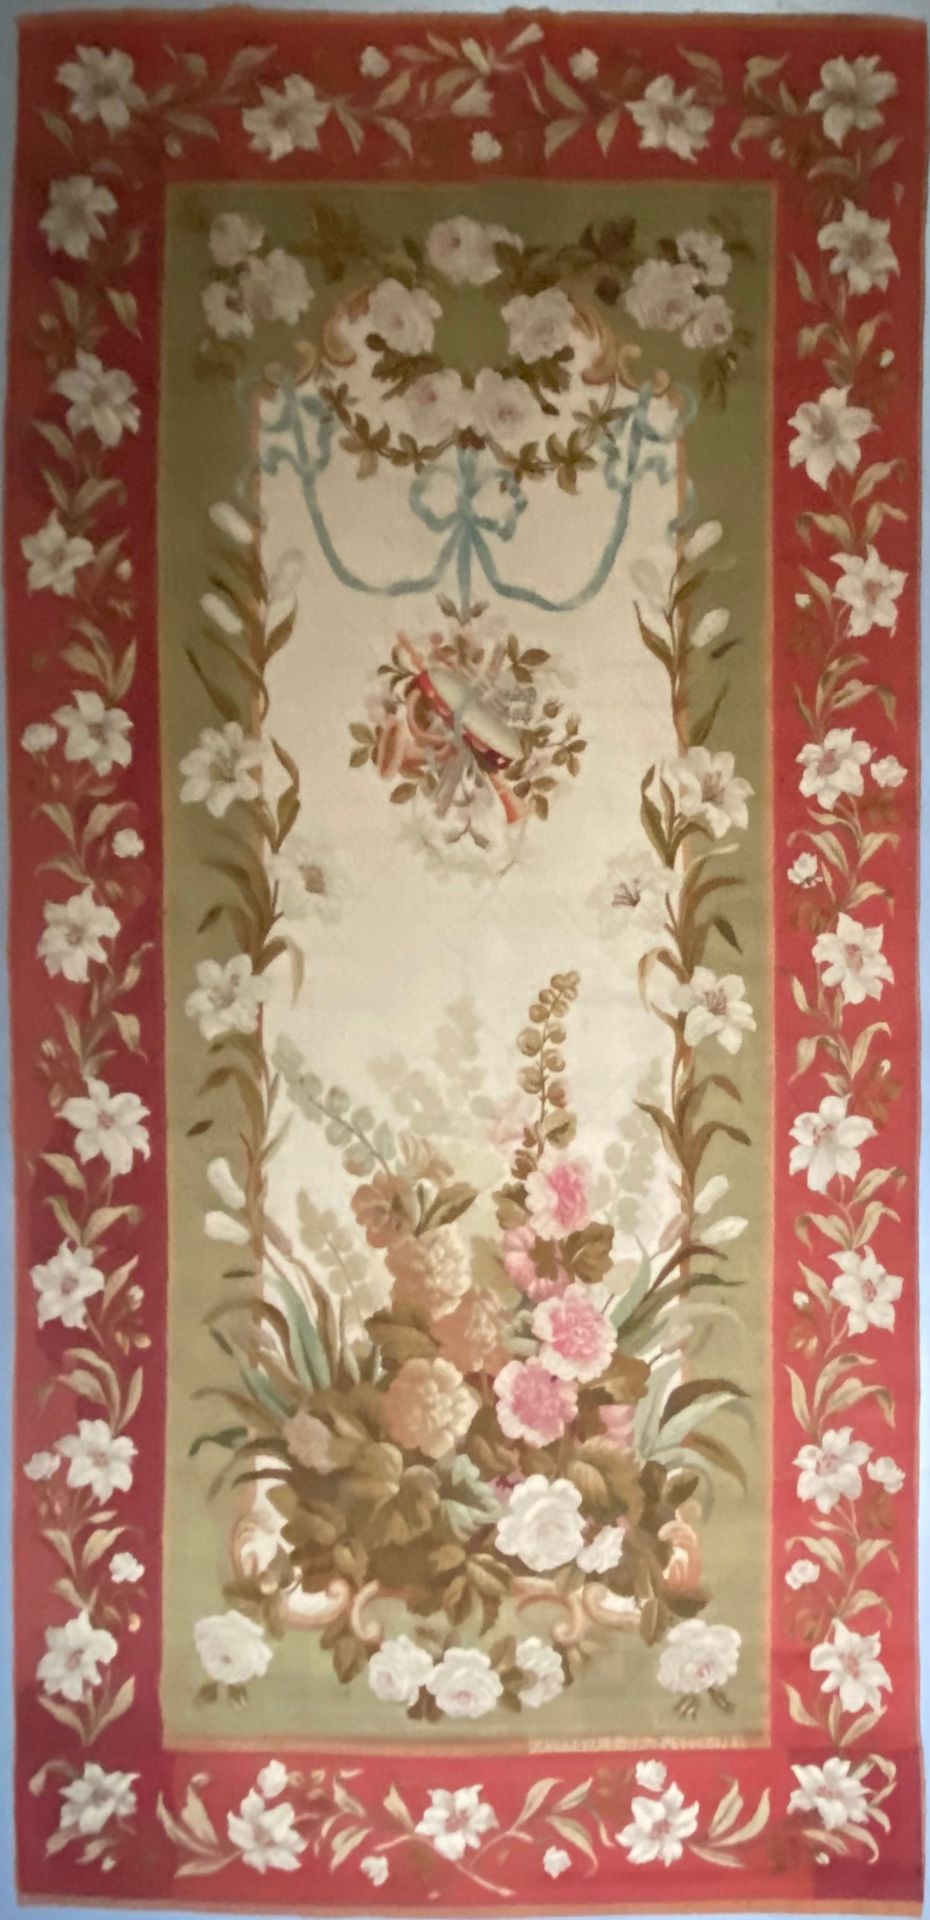 MANUFACTURE ROYALE D'AUBUSSON 1782 Door tapestry. Polychrome decoration of flowe&hellip;